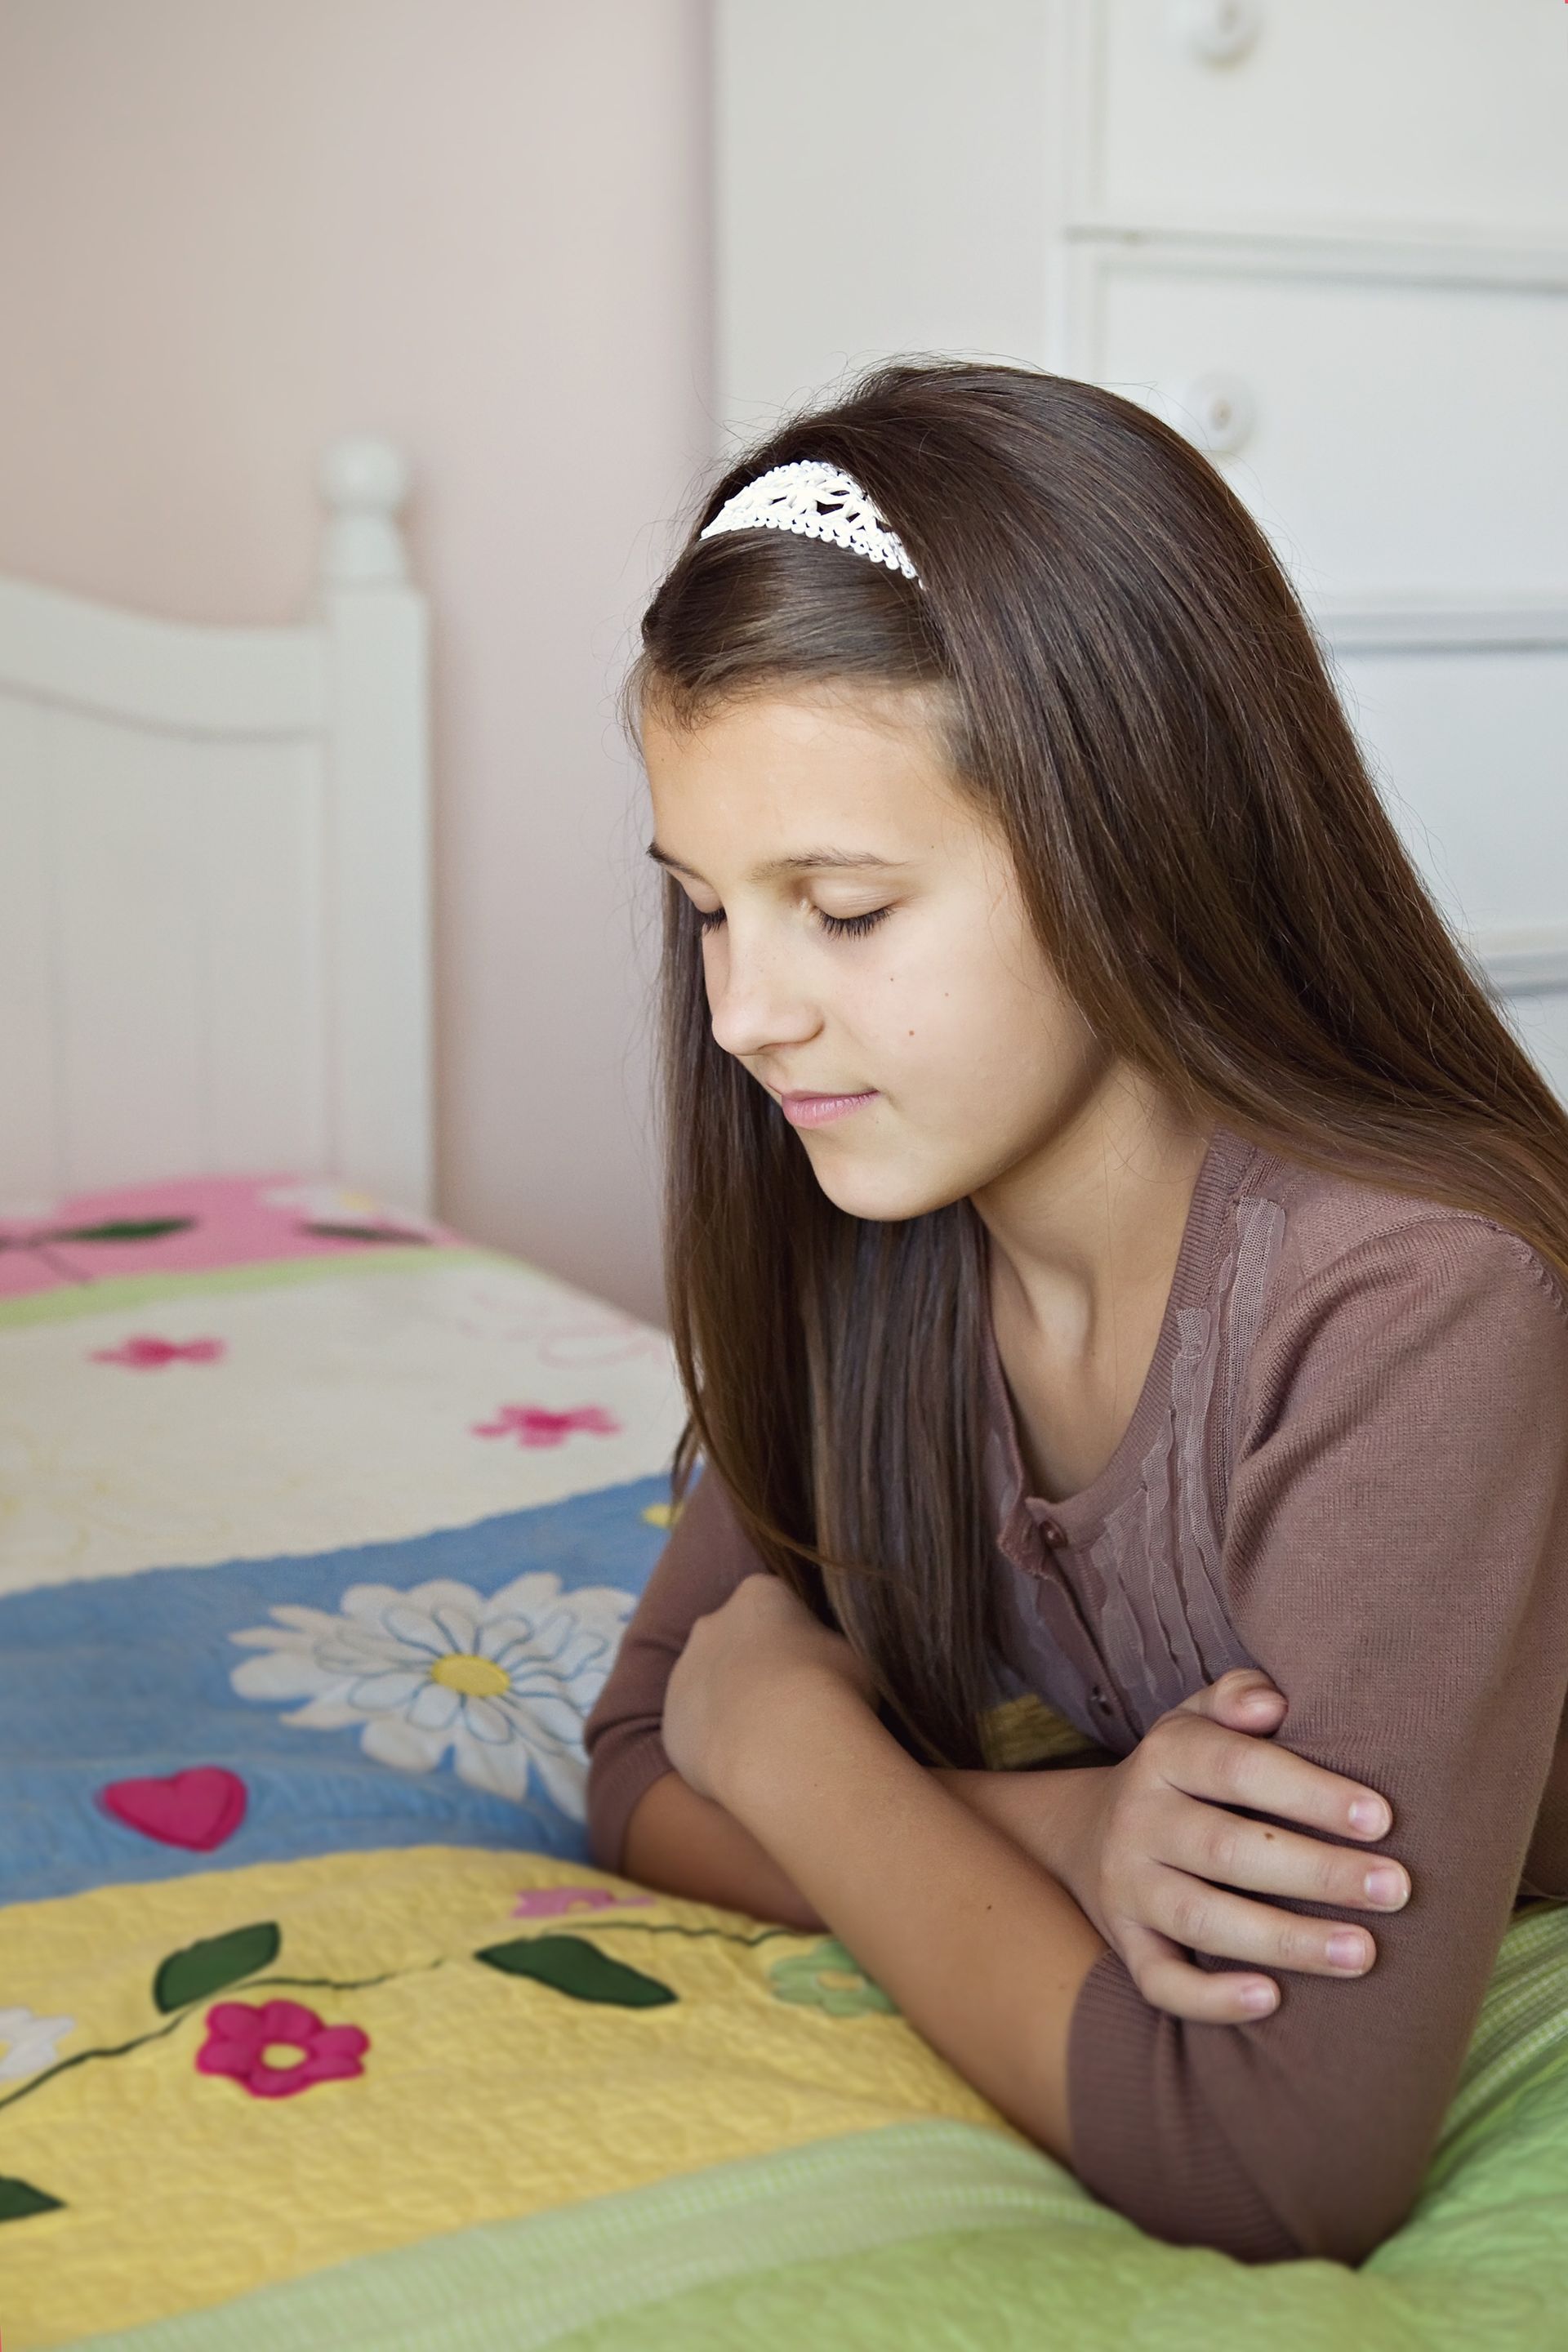 A young girl kneels in her bedroom and prays.